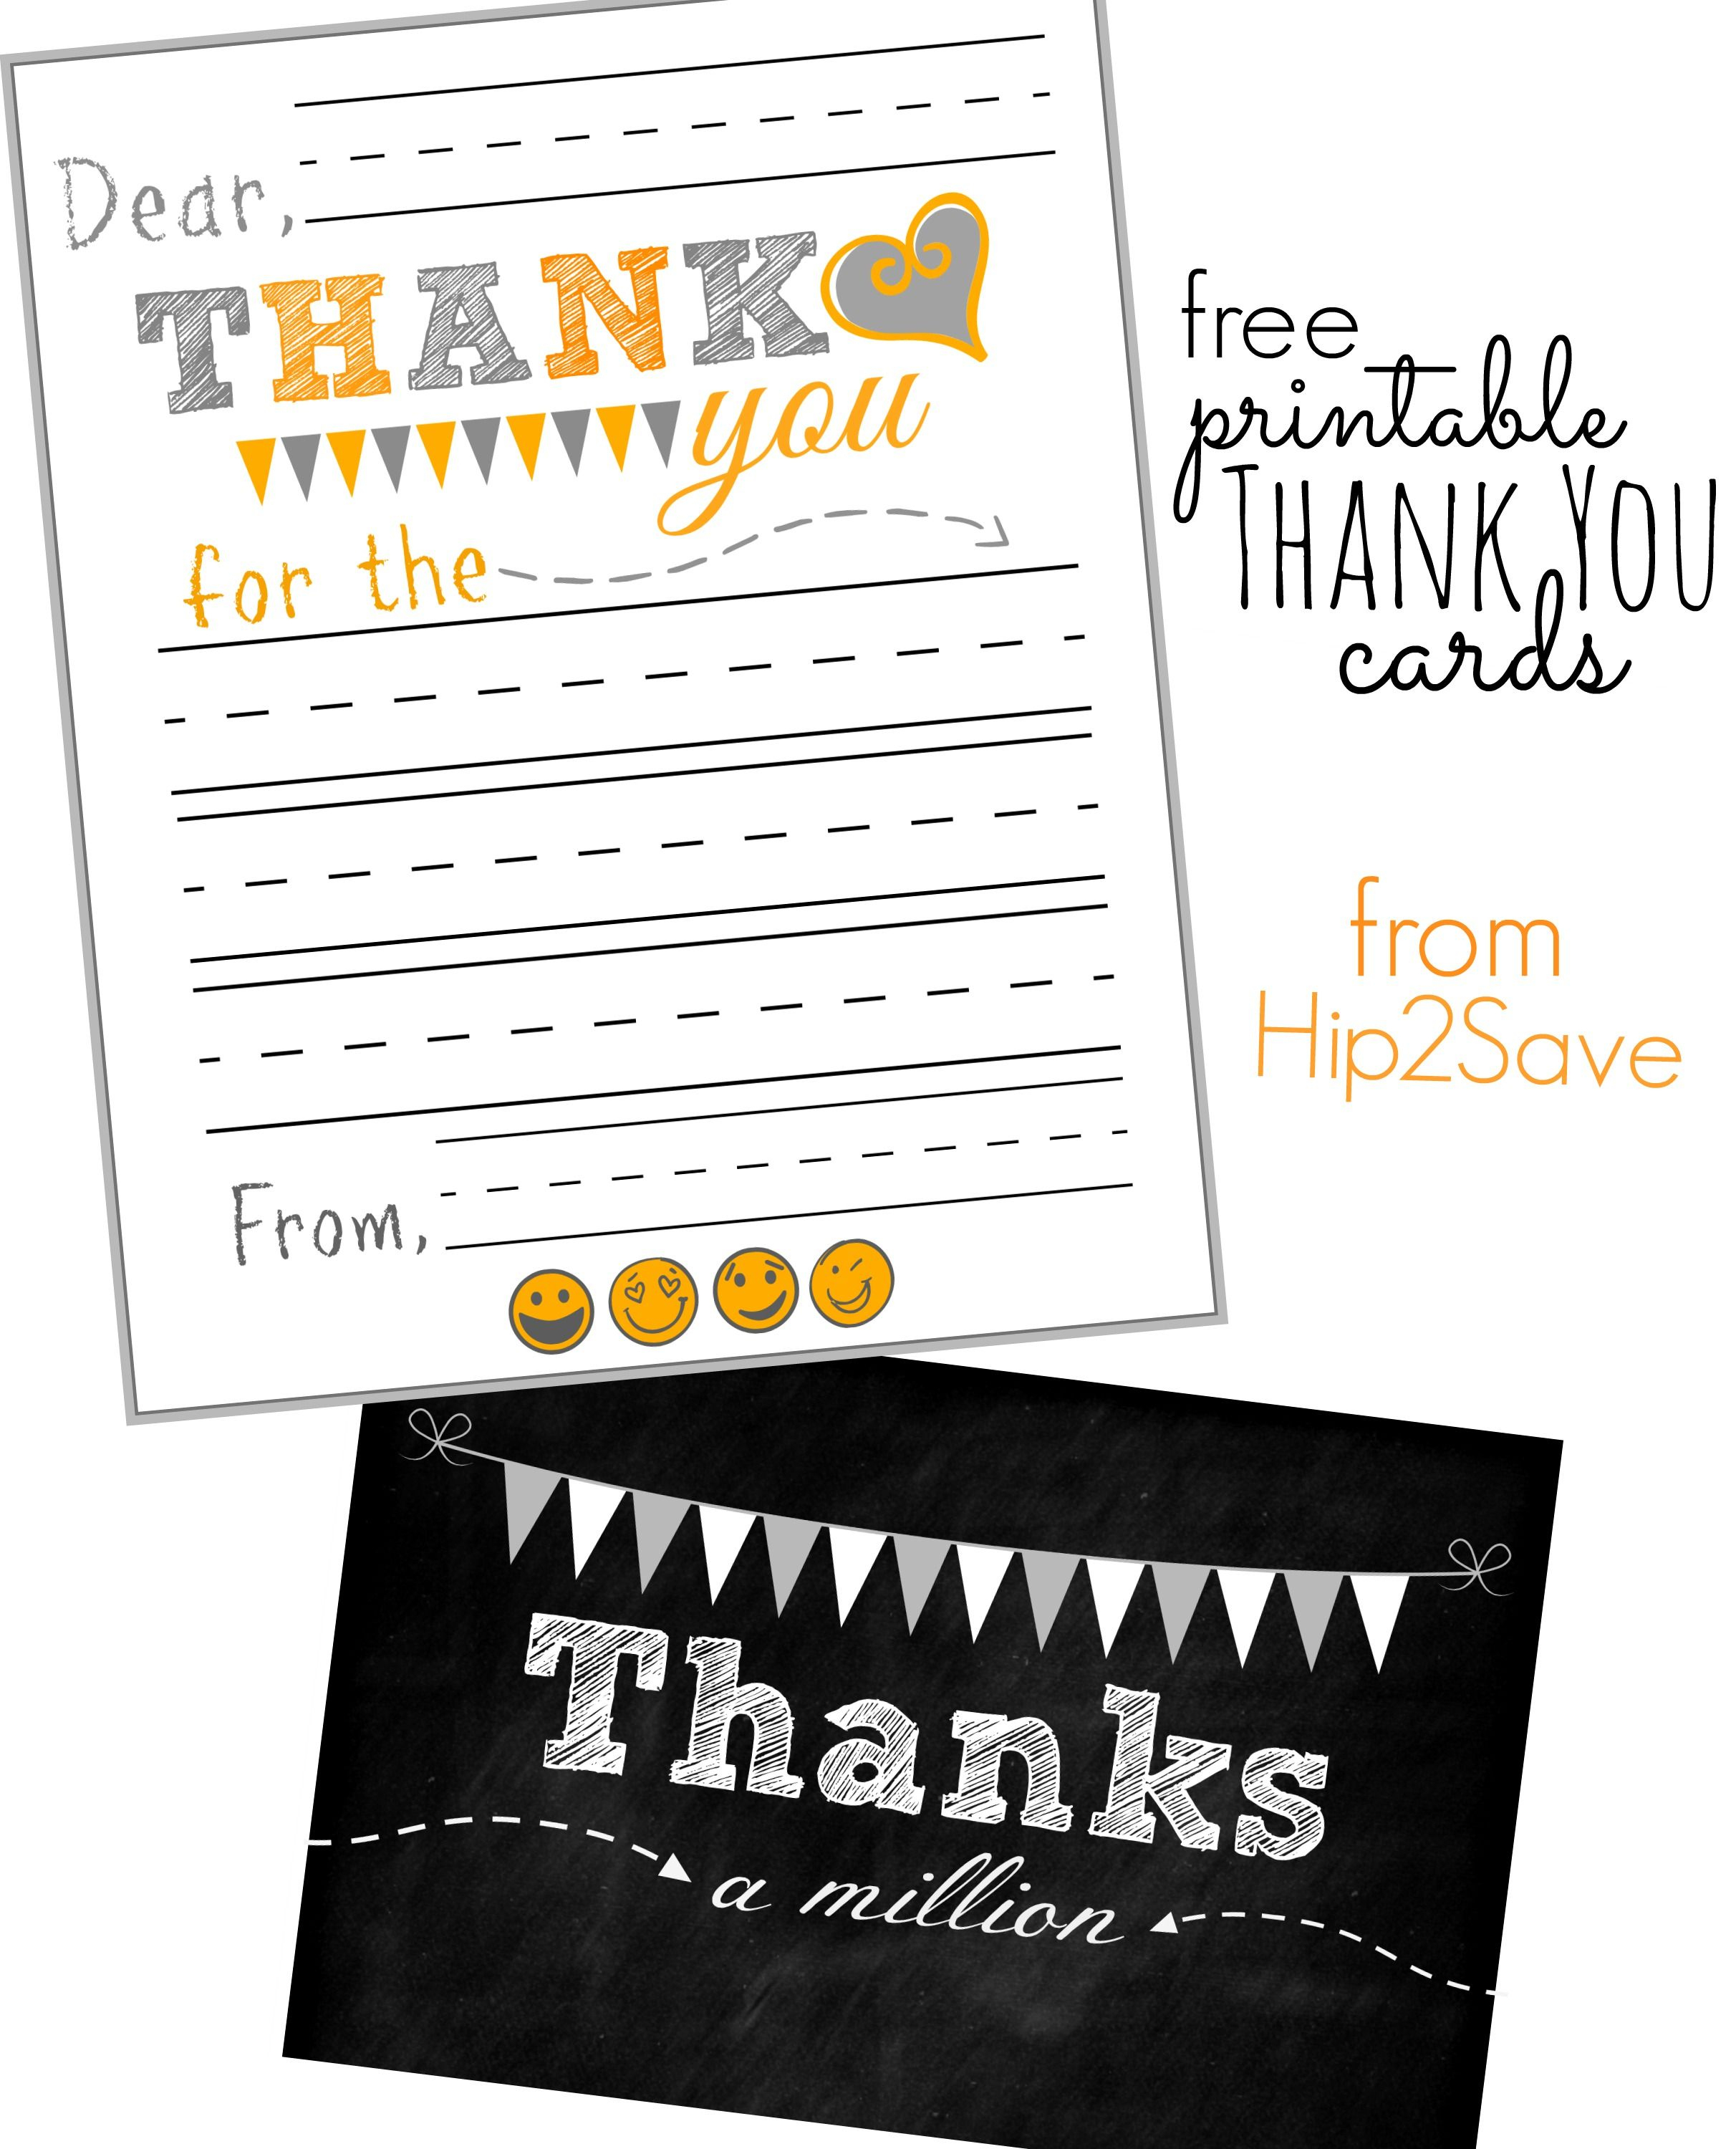 Free Printable Thank You Cards | Let&amp;#039;s Get Crafty! | Pinterest - Free Printable Thank You Cards For Teachers